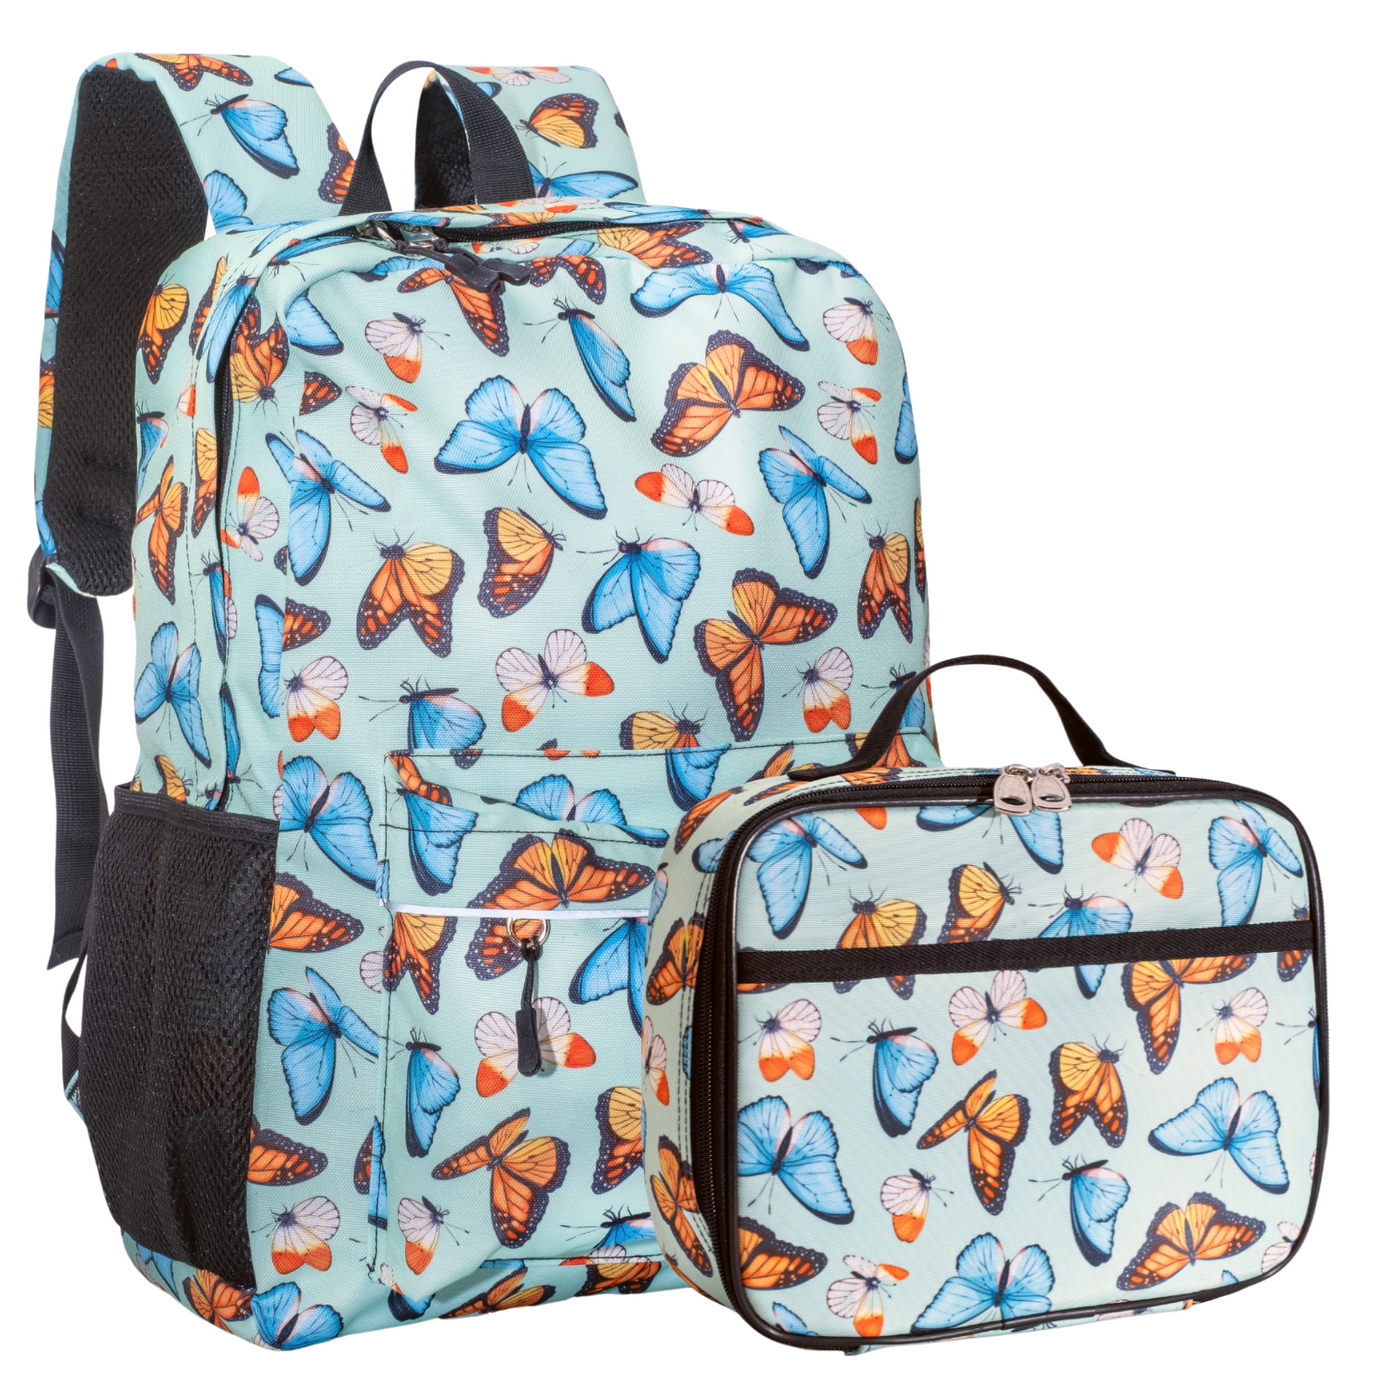 Get Your Child One of These Great Lunch Boxes and Backpacks to